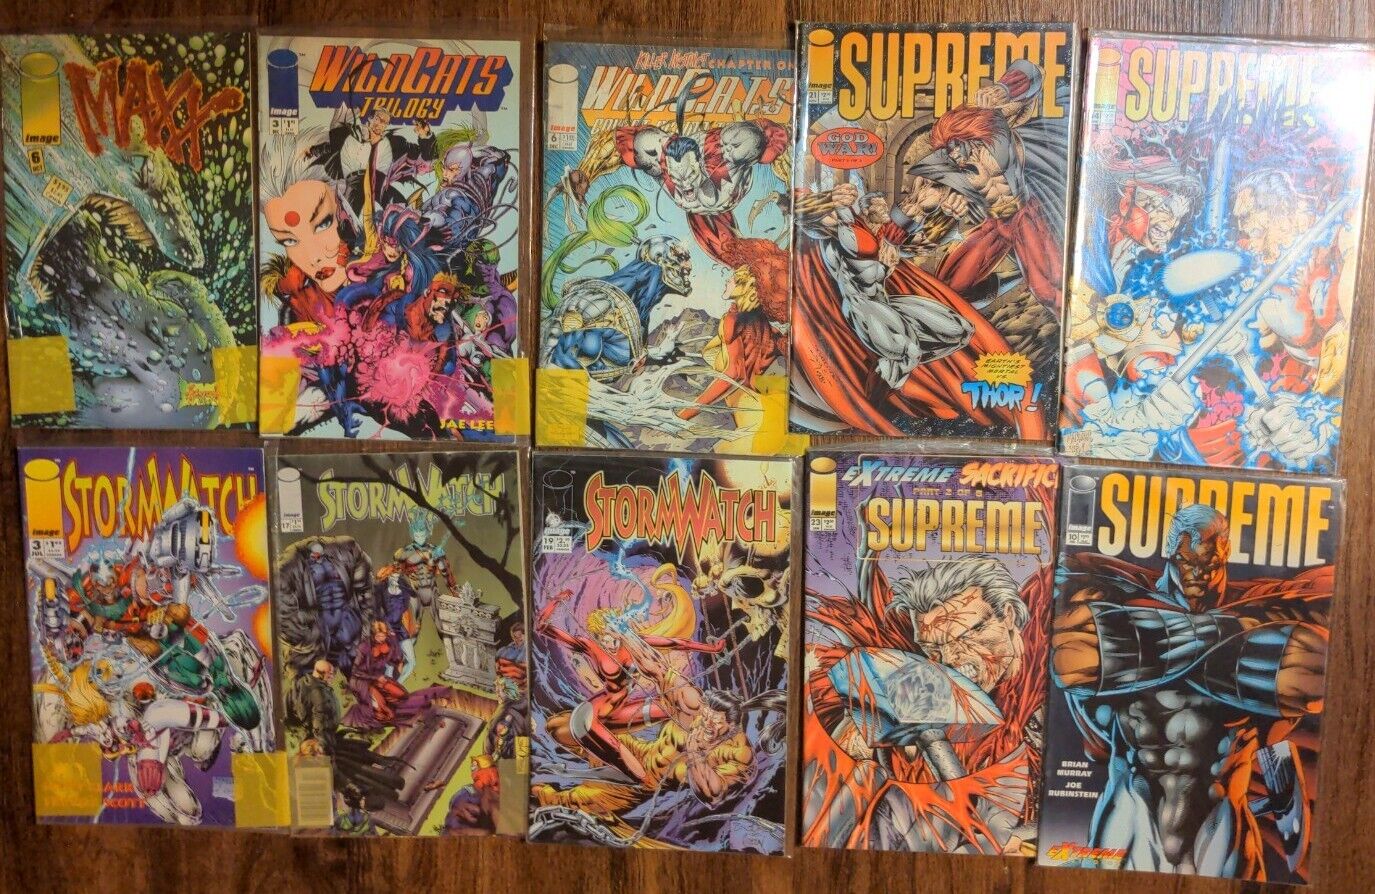 LOT of 10 Issues Image Comics Wildcats, Supreme, Storm watch, Maxx